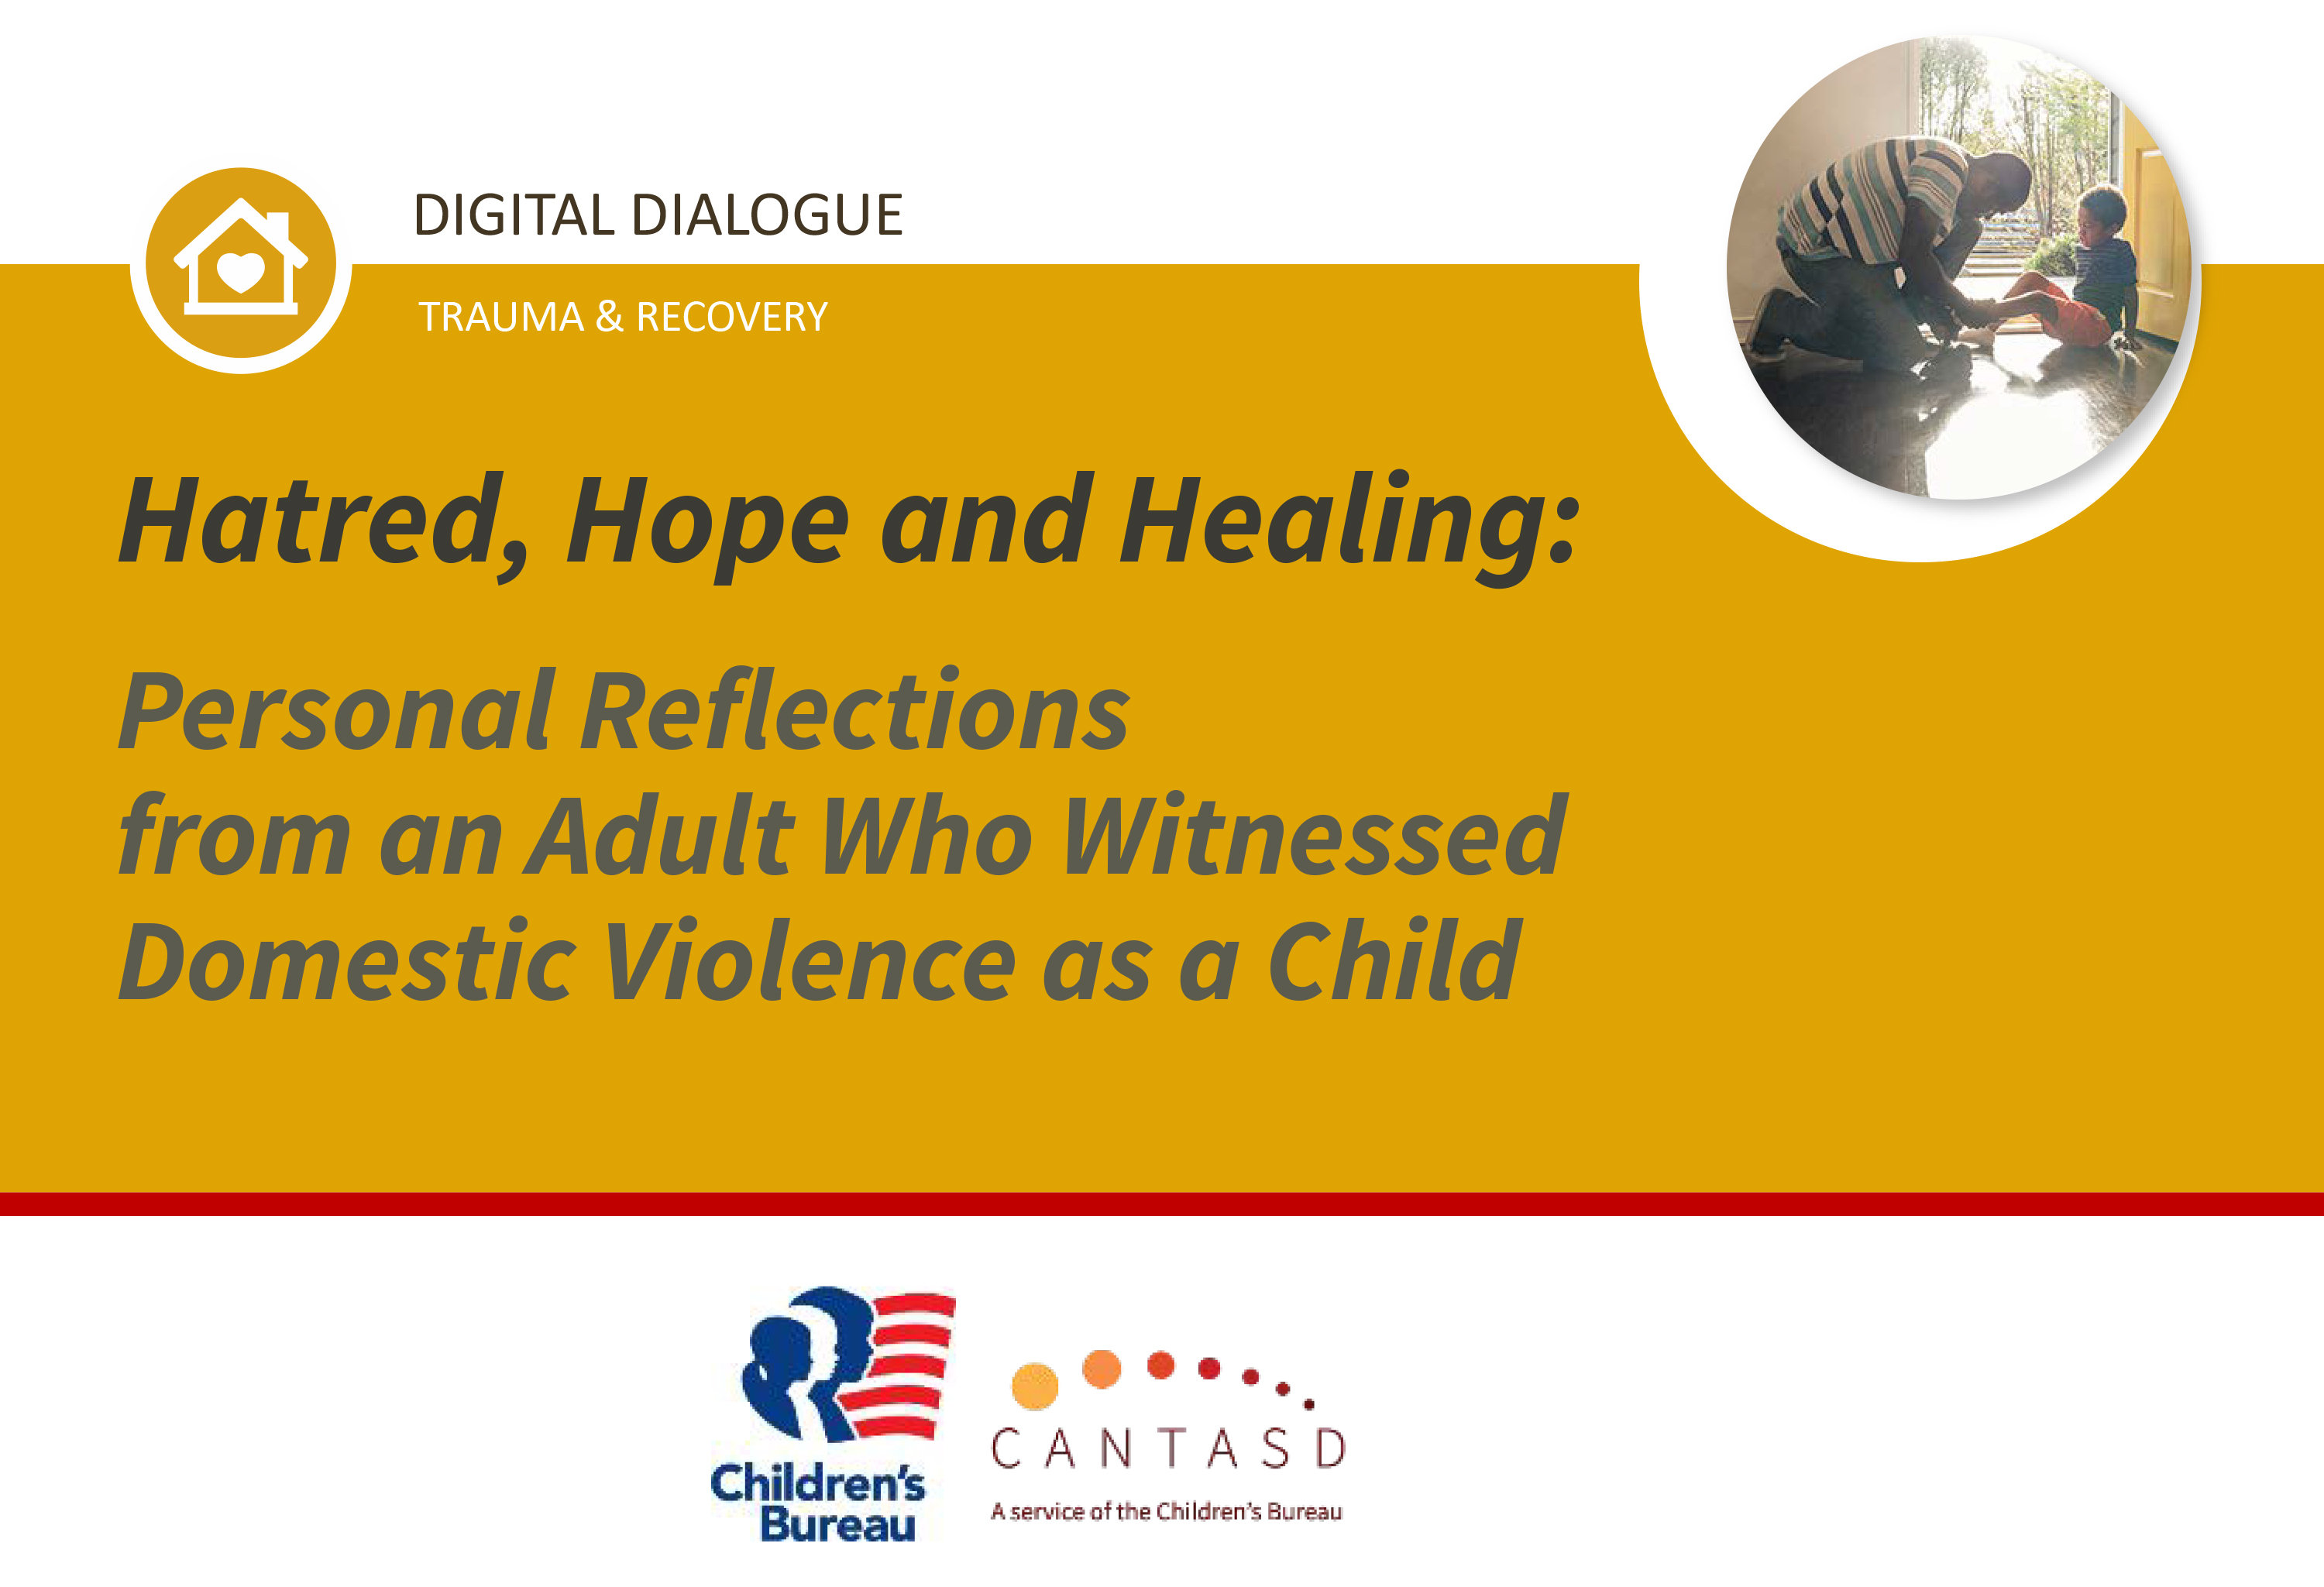 Hatred, Hope and Healing: Personal Reflections from an Adult Who Witnessed Domestic Violence as a Child (This link opens in a new window)